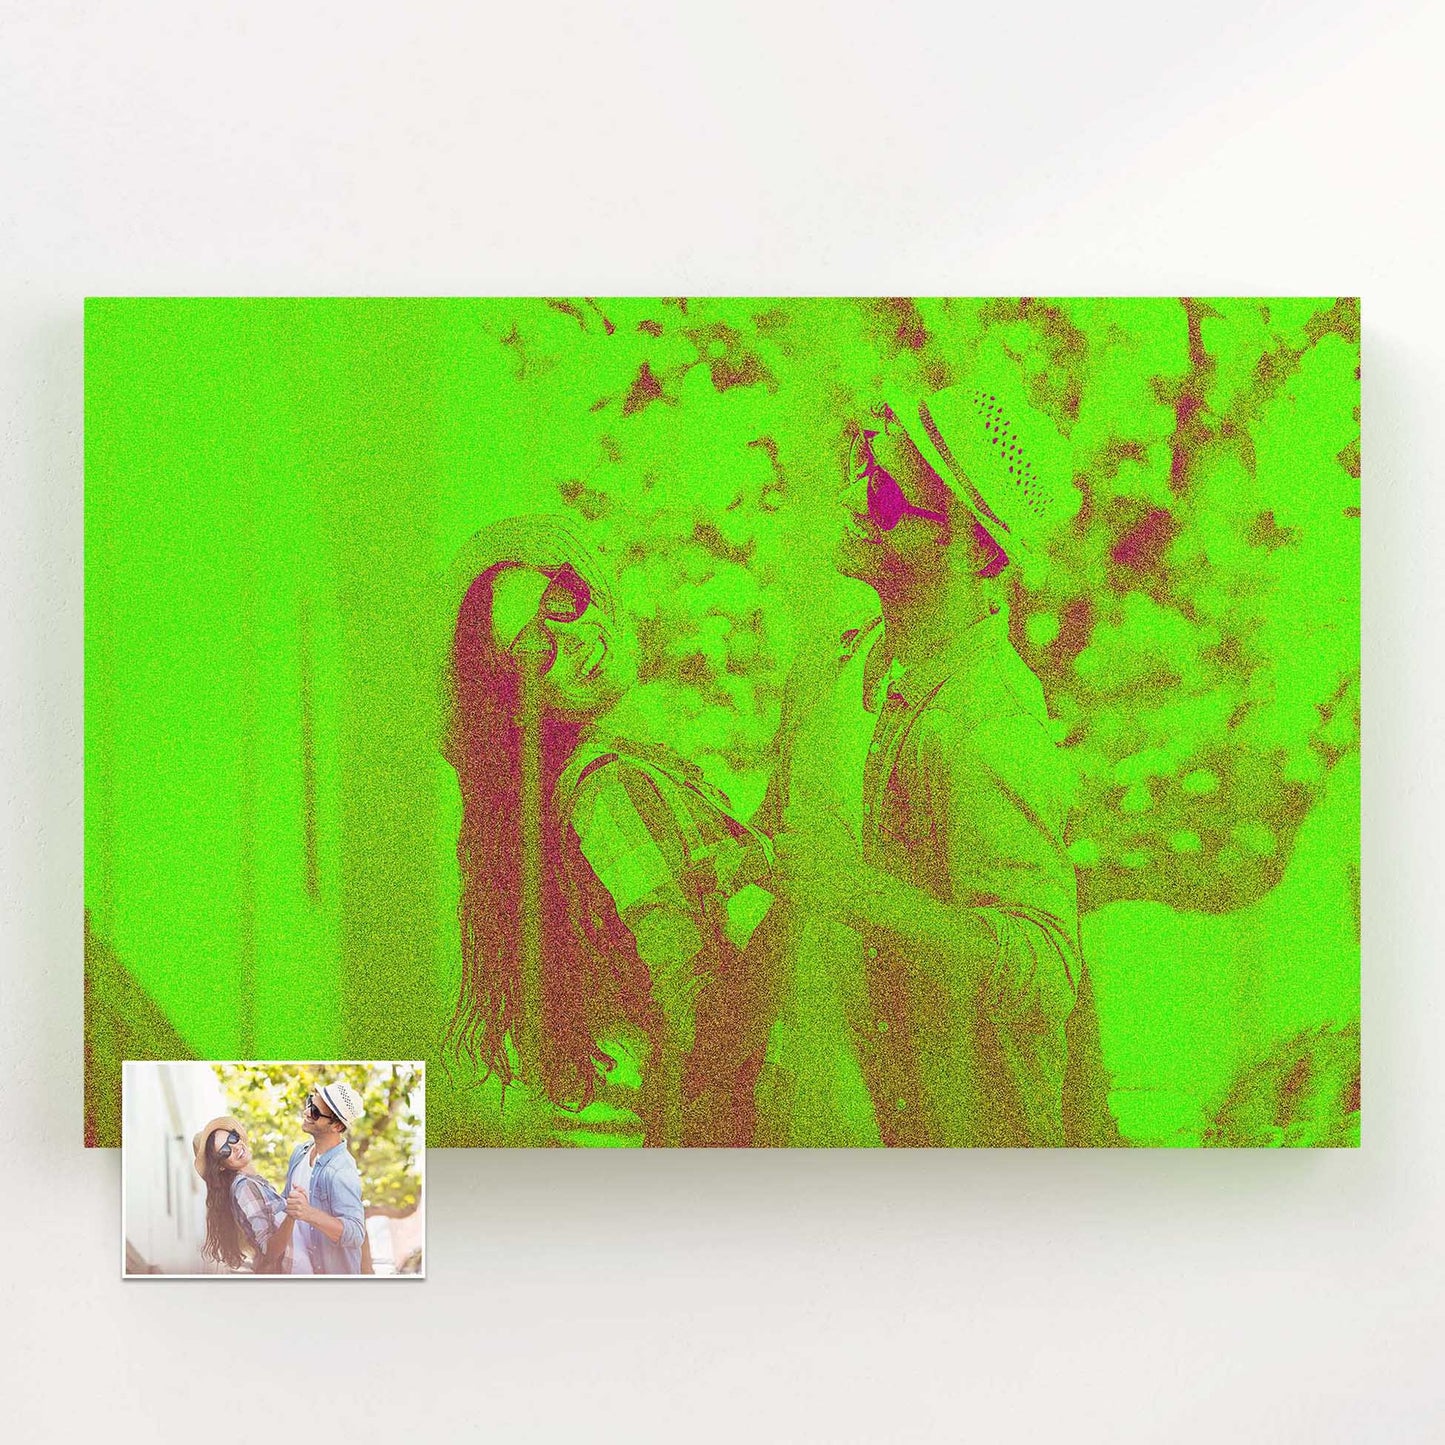 Celebrate life's special moments with our personalised neon green canvas. From birthdays to family gatherings, our custom-made artworks capture the essence of your memories, painting from your photo with vibrant neon green shades 